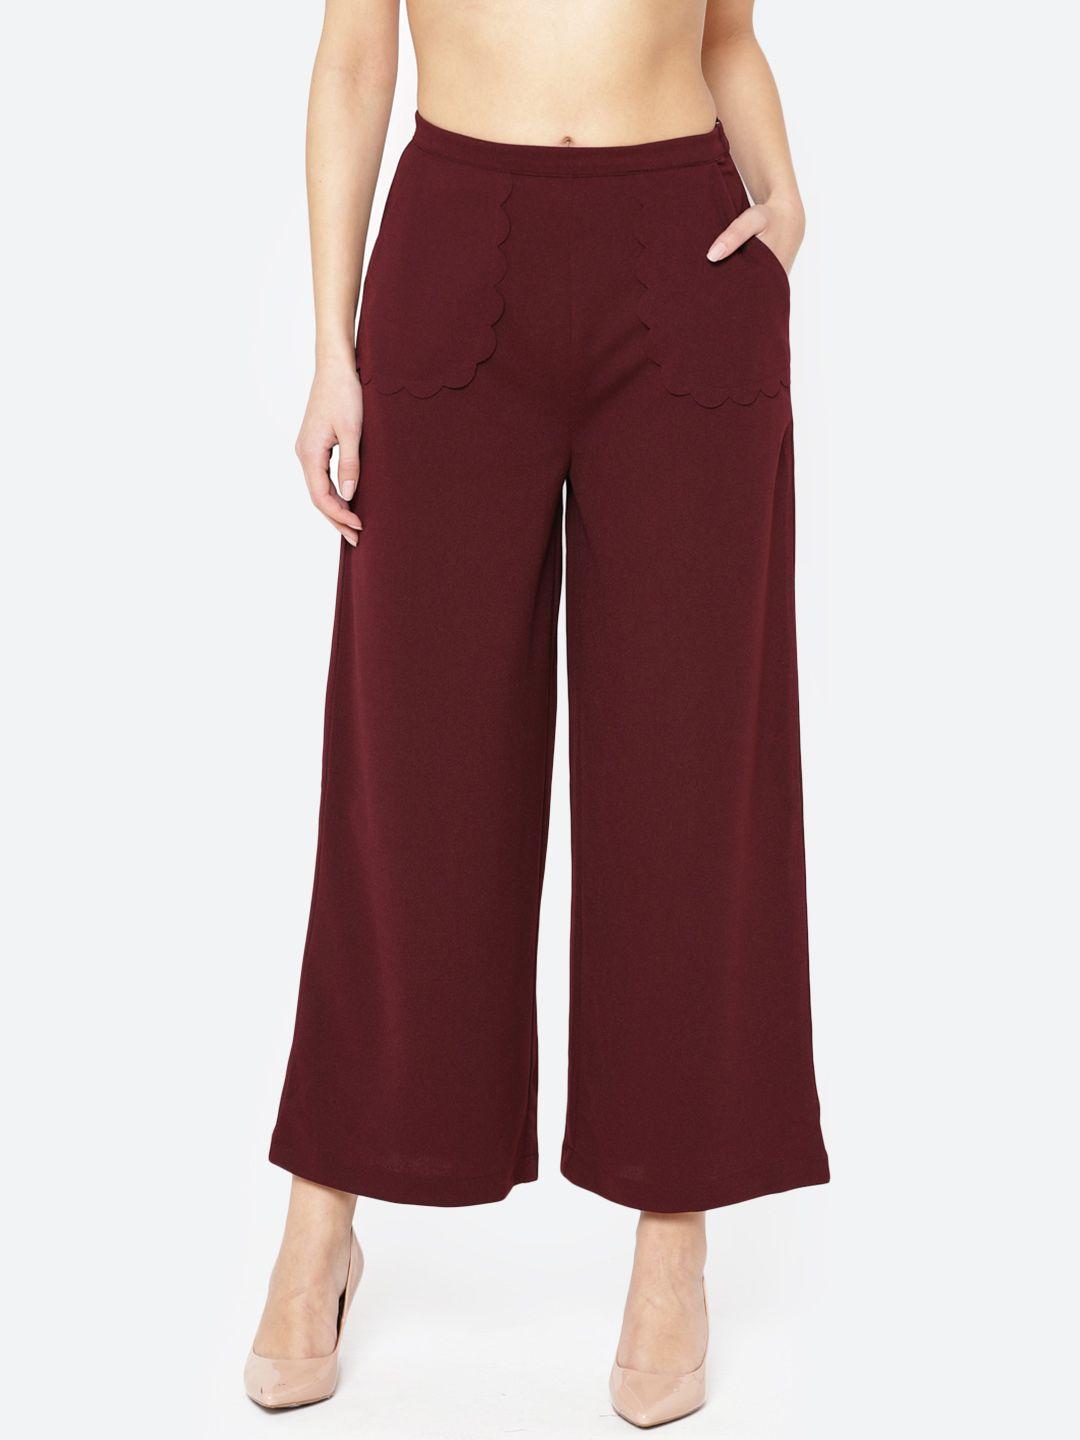 carlton london women burgundy straight fit solid parallel trousers